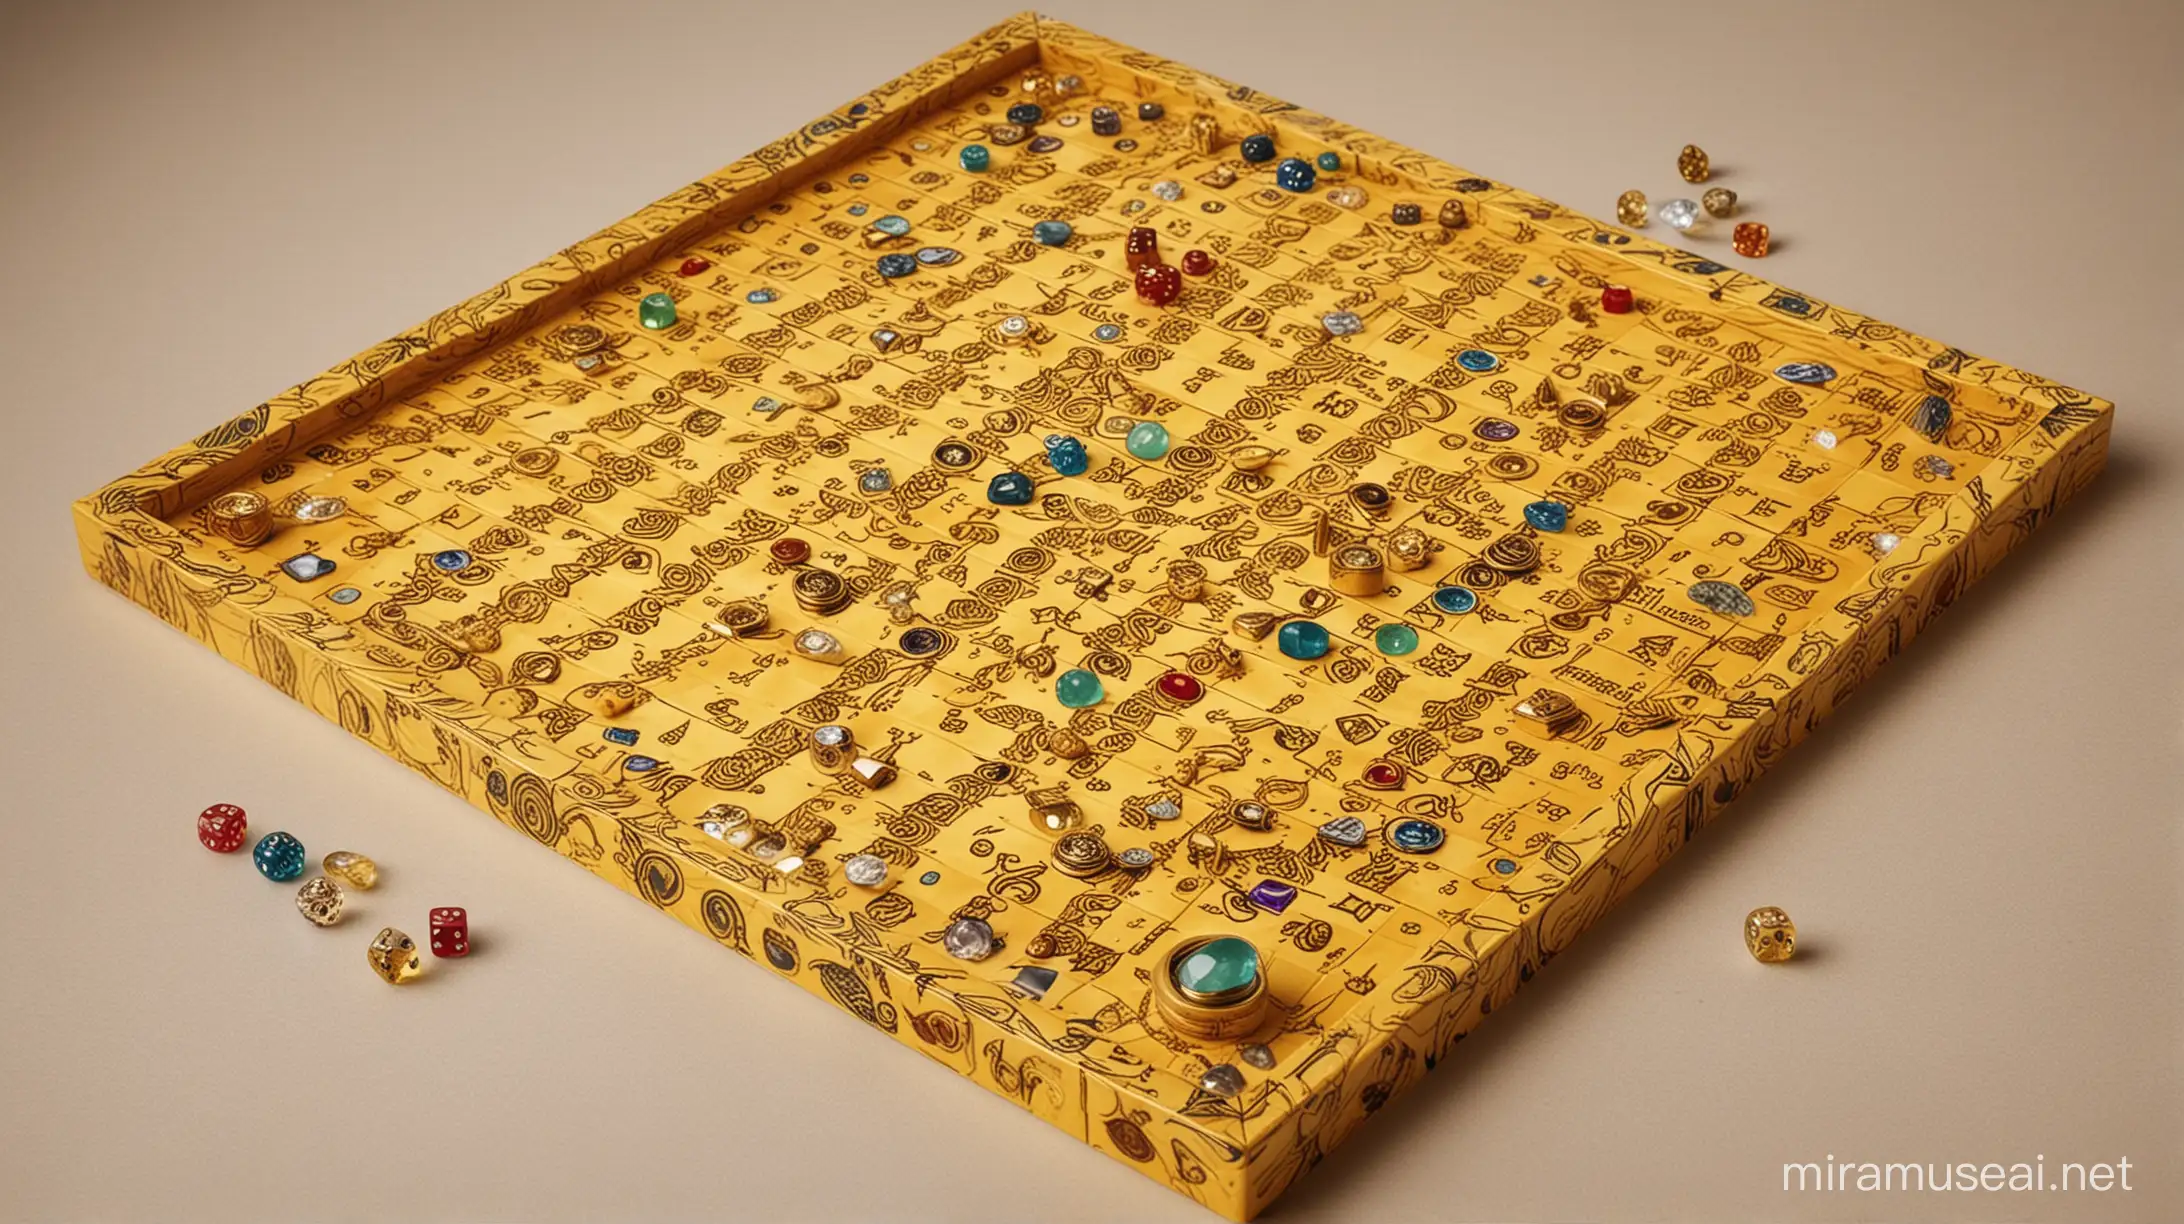 Mystical Snake and Ladder Board Game with Gold Ladders and Diamond Snakes